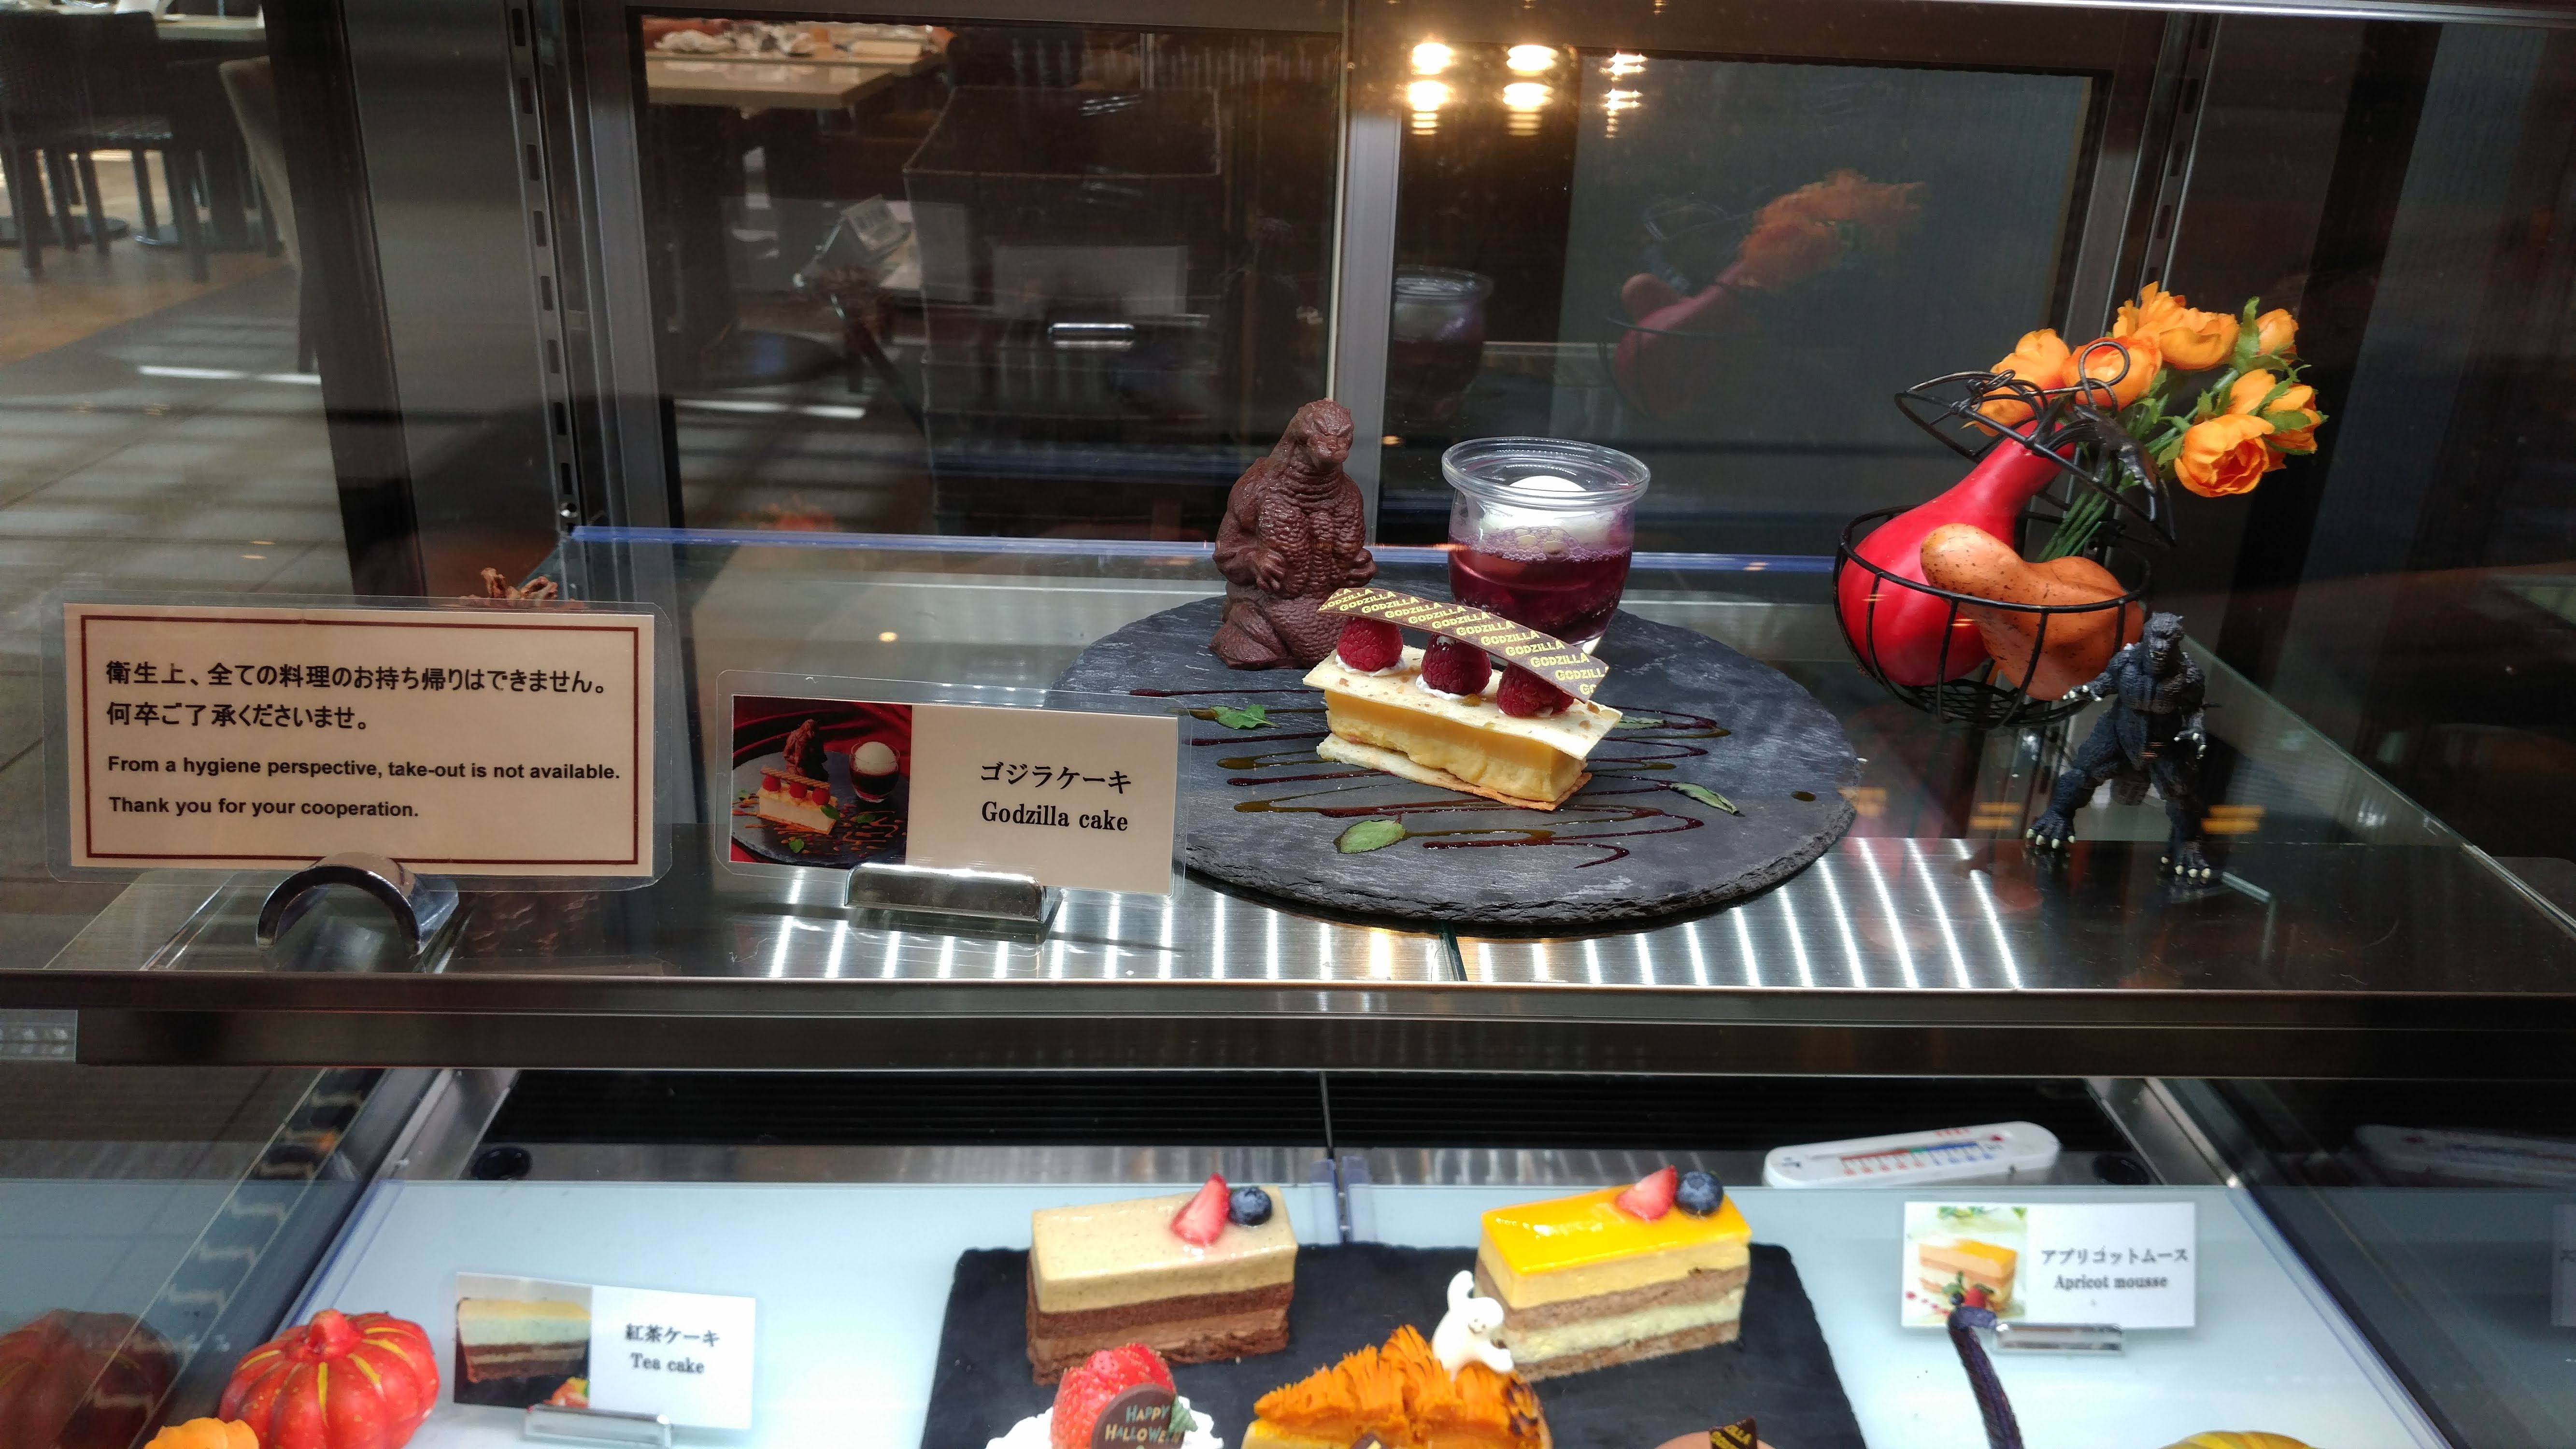 a display of available desserts including godzilla cake